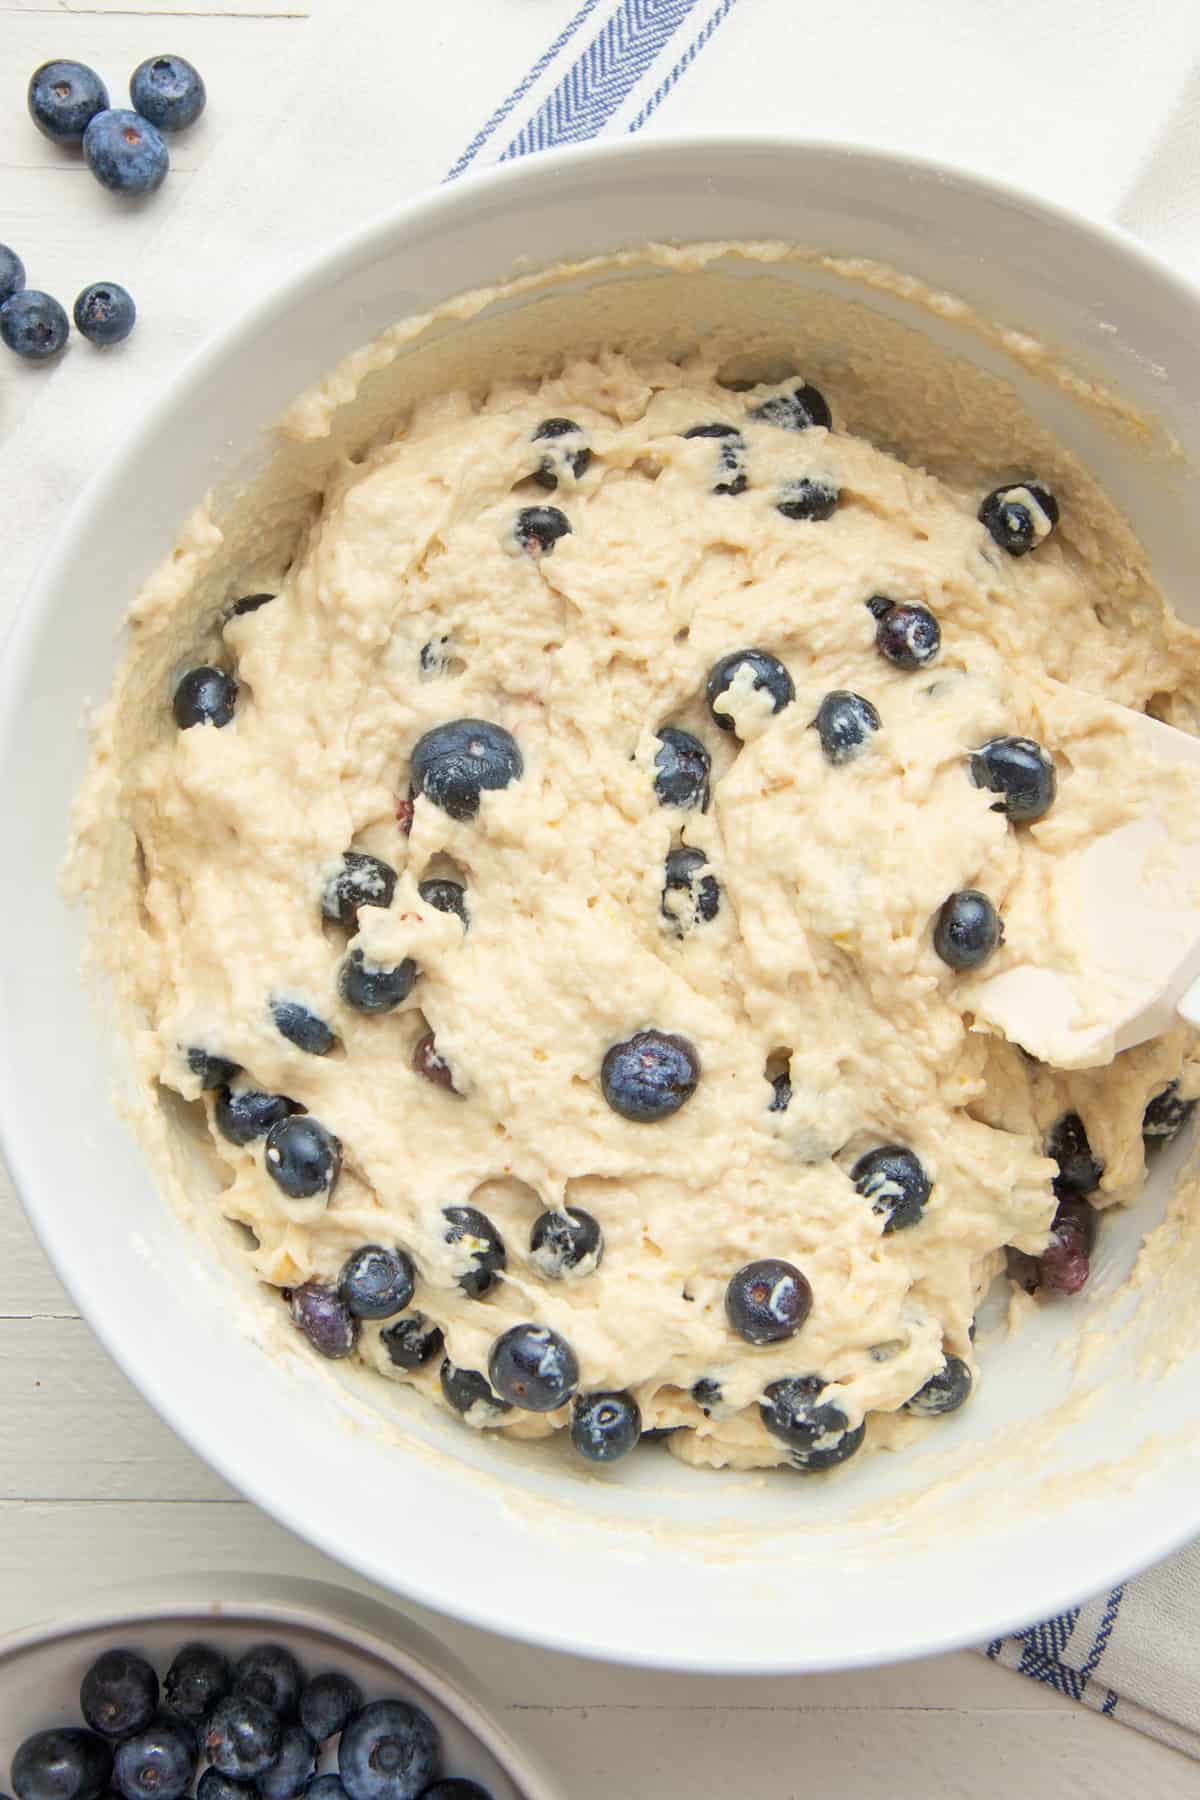 A spoon mixes fresh blueberries into muffin batter.